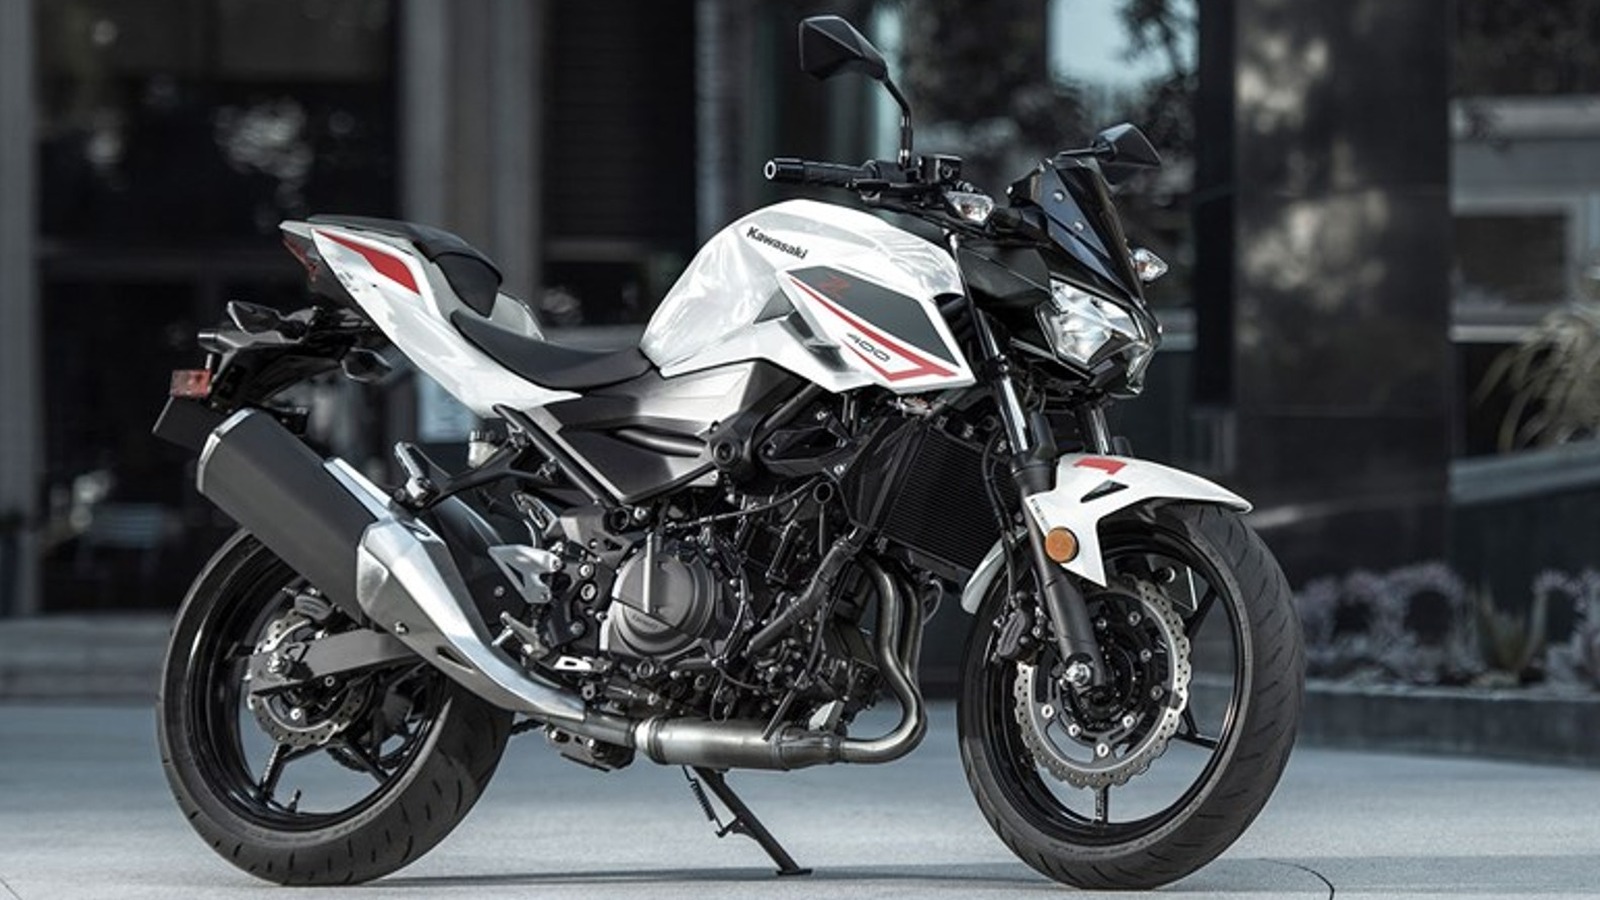 Is The Kawasaki Z400 A Good Bike For Beginners? Here's What You Need To Know